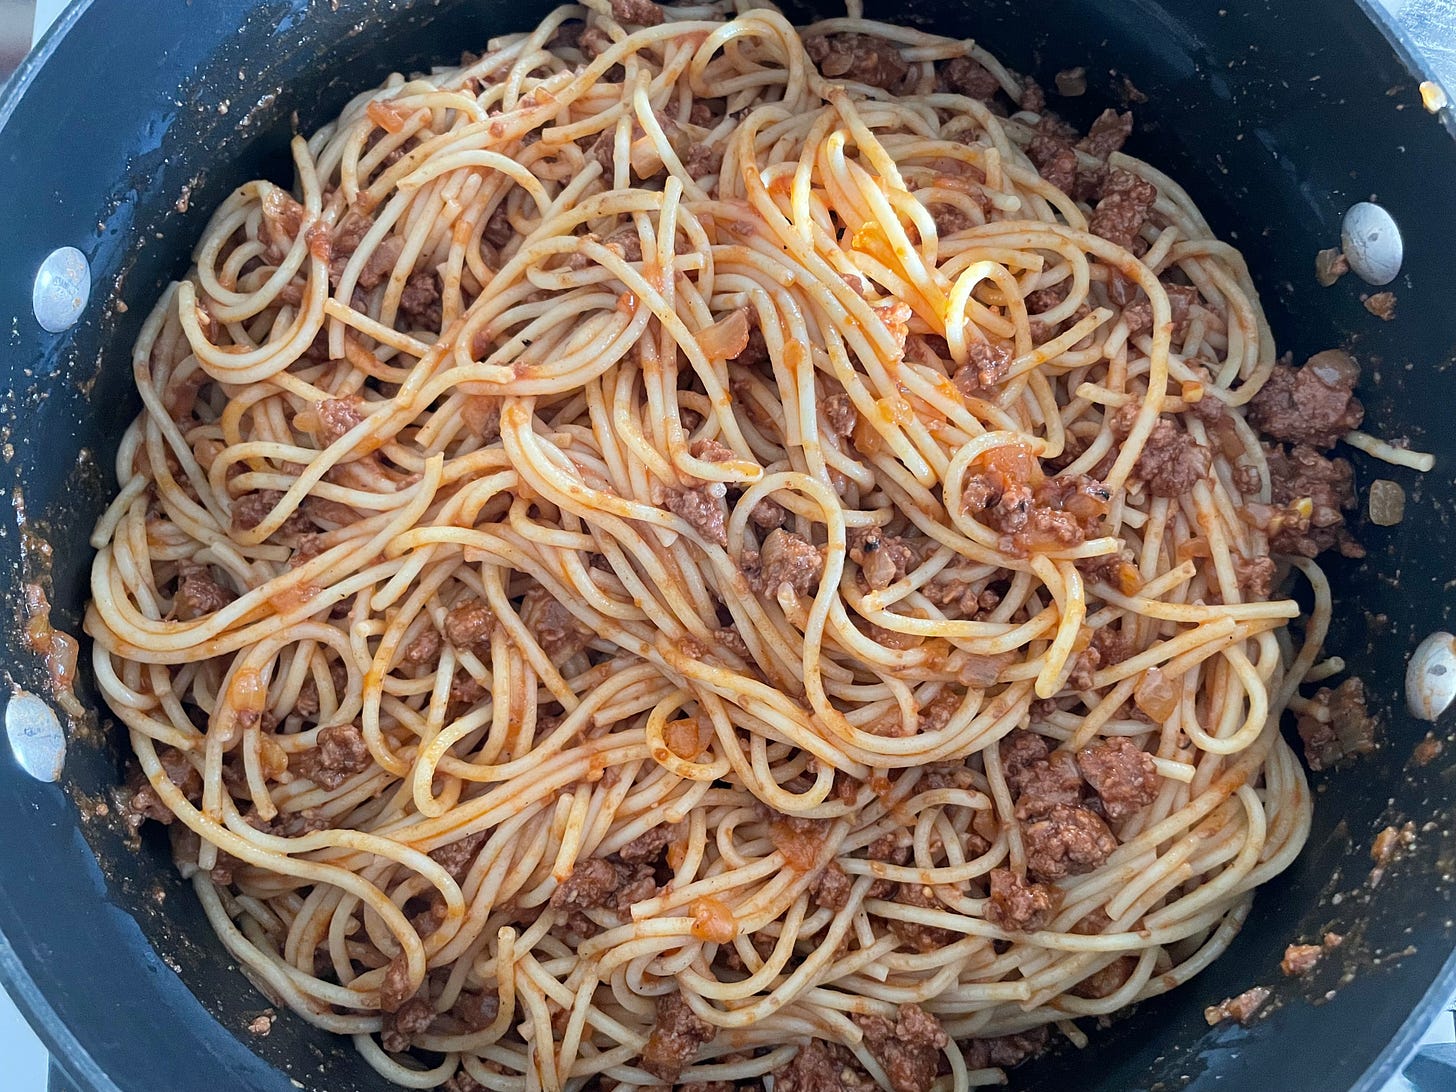 spaghetti noodles mixed with meat sauce